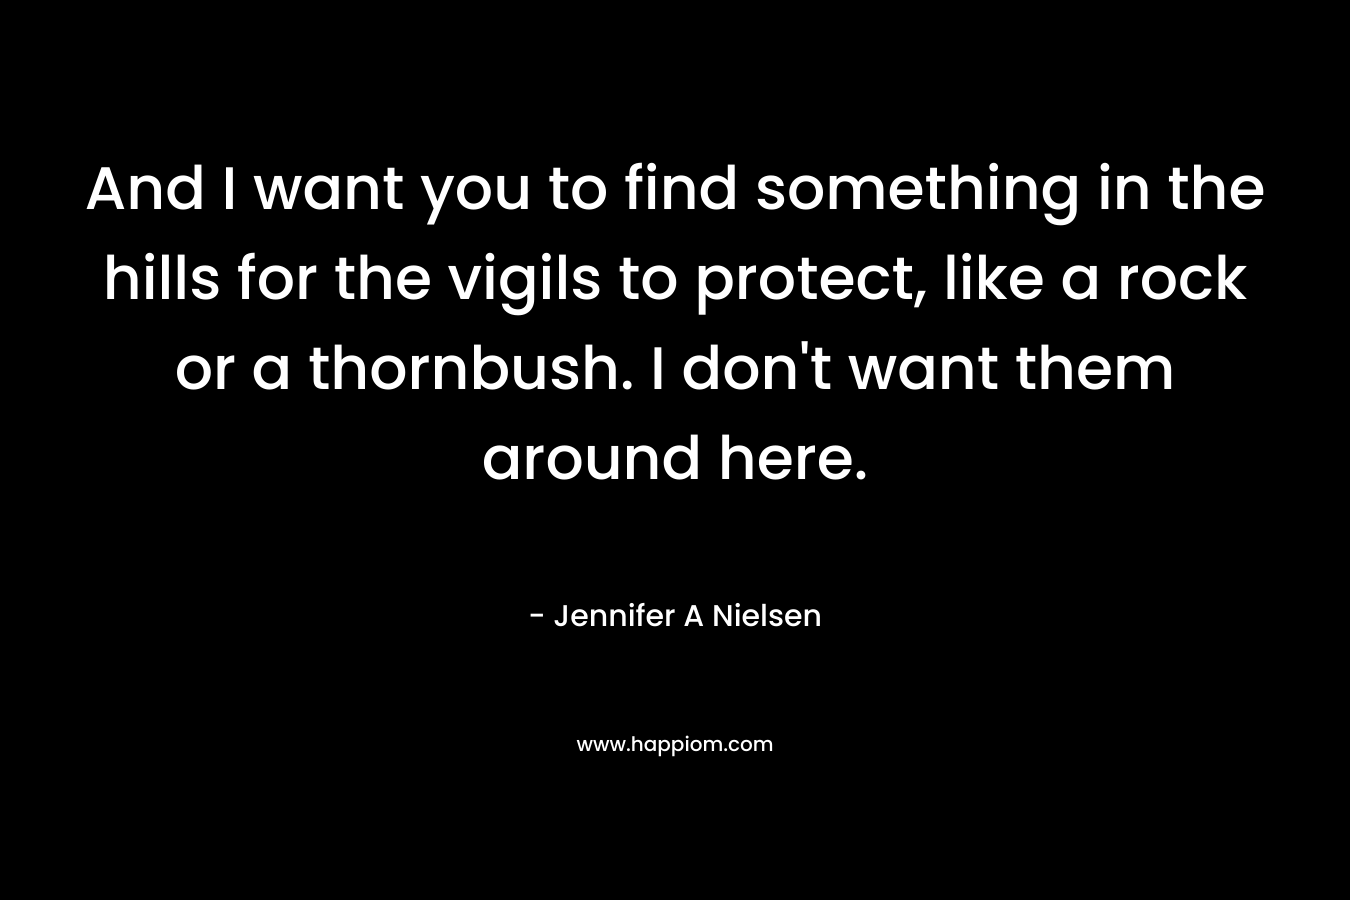 And I want you to find something in the hills for the vigils to protect, like a rock or a thornbush. I don’t want them around here. – Jennifer A Nielsen